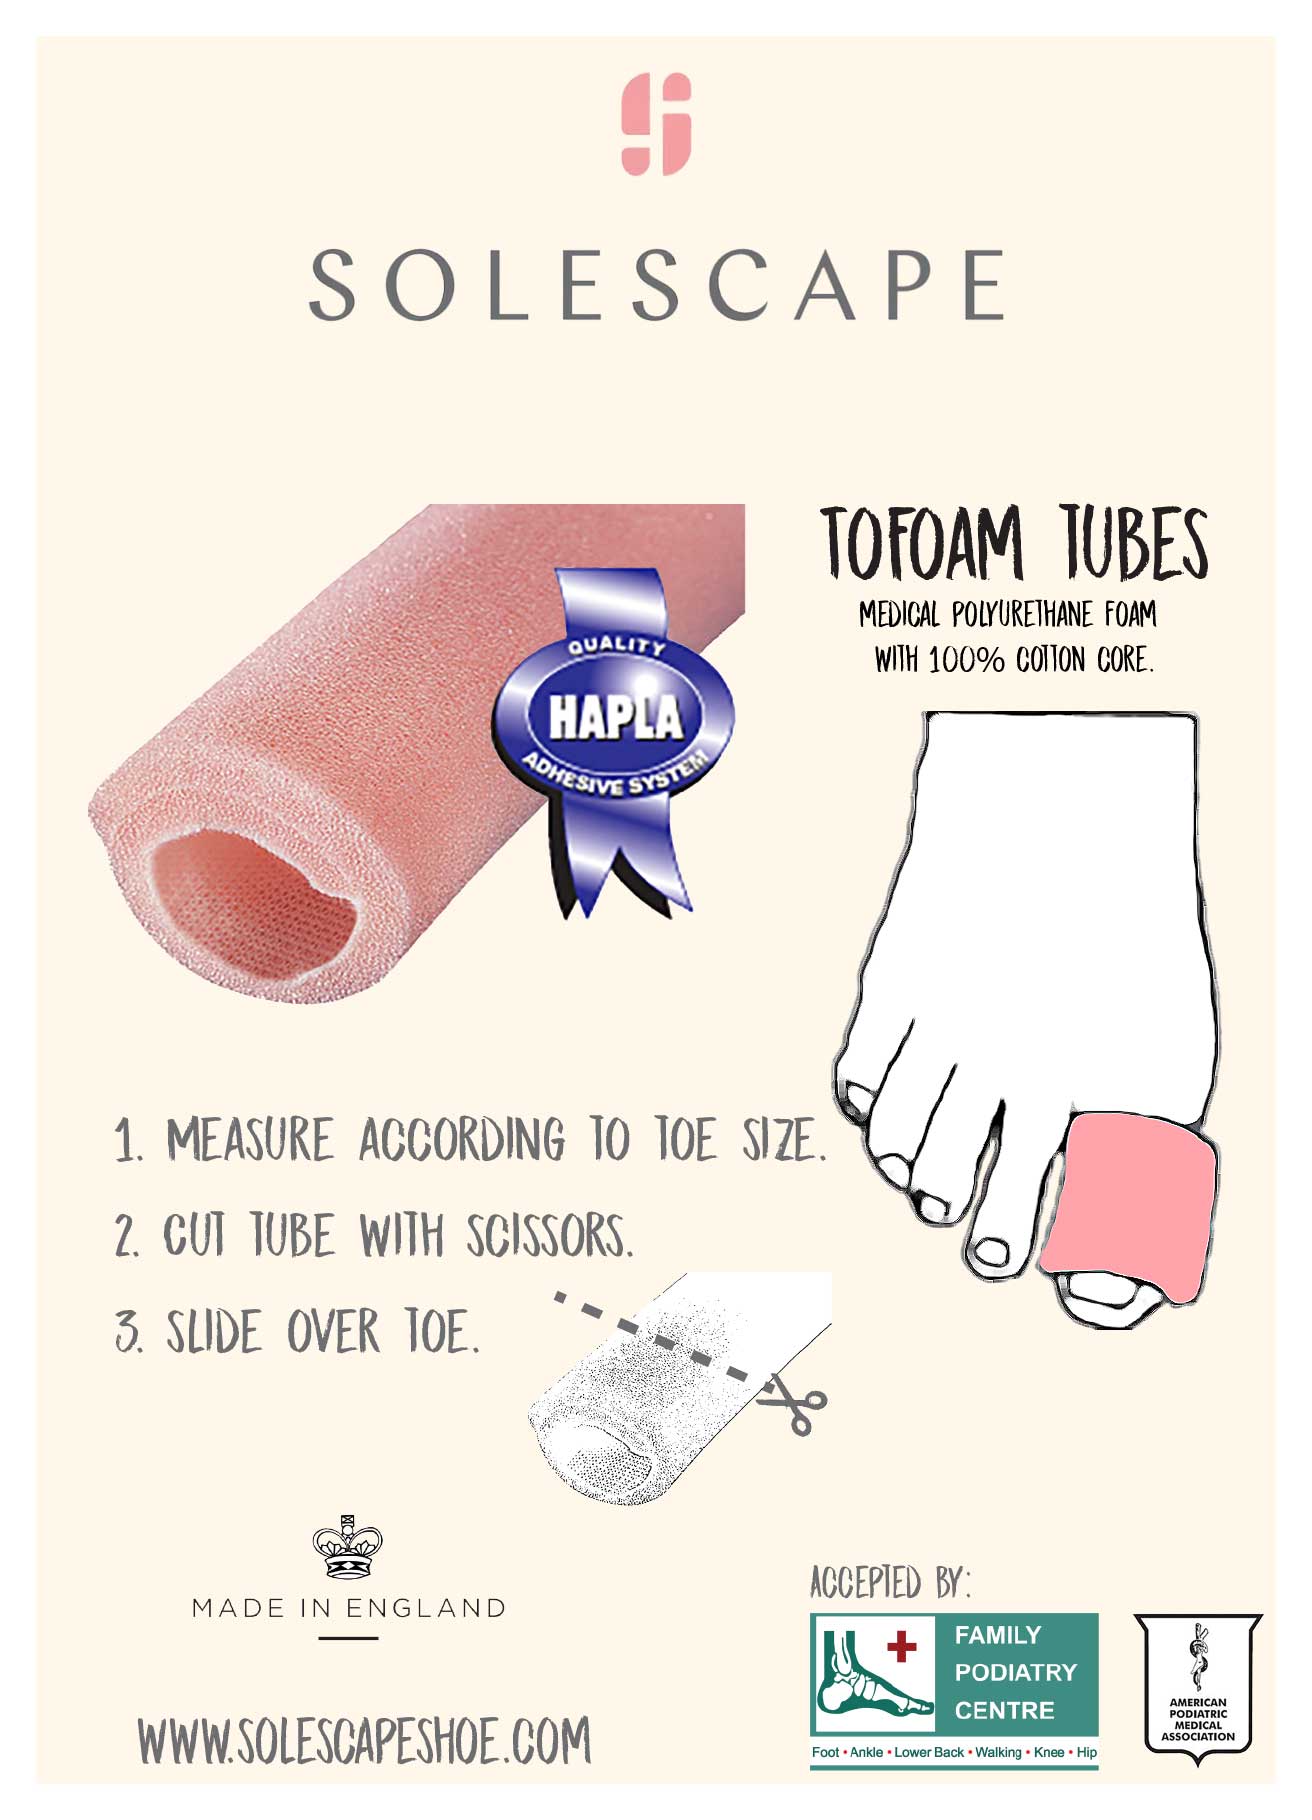 TOFOAM TUBE | Solescape Shoes | Beautiful Wellness Shoes 👡 | Orthopaedic Podiatrist Approved Designs | Suitable for Foot Conditions | Flat Feet | Plantar Fasciitis | Bunions | Insoles | Singapore | Malaysia